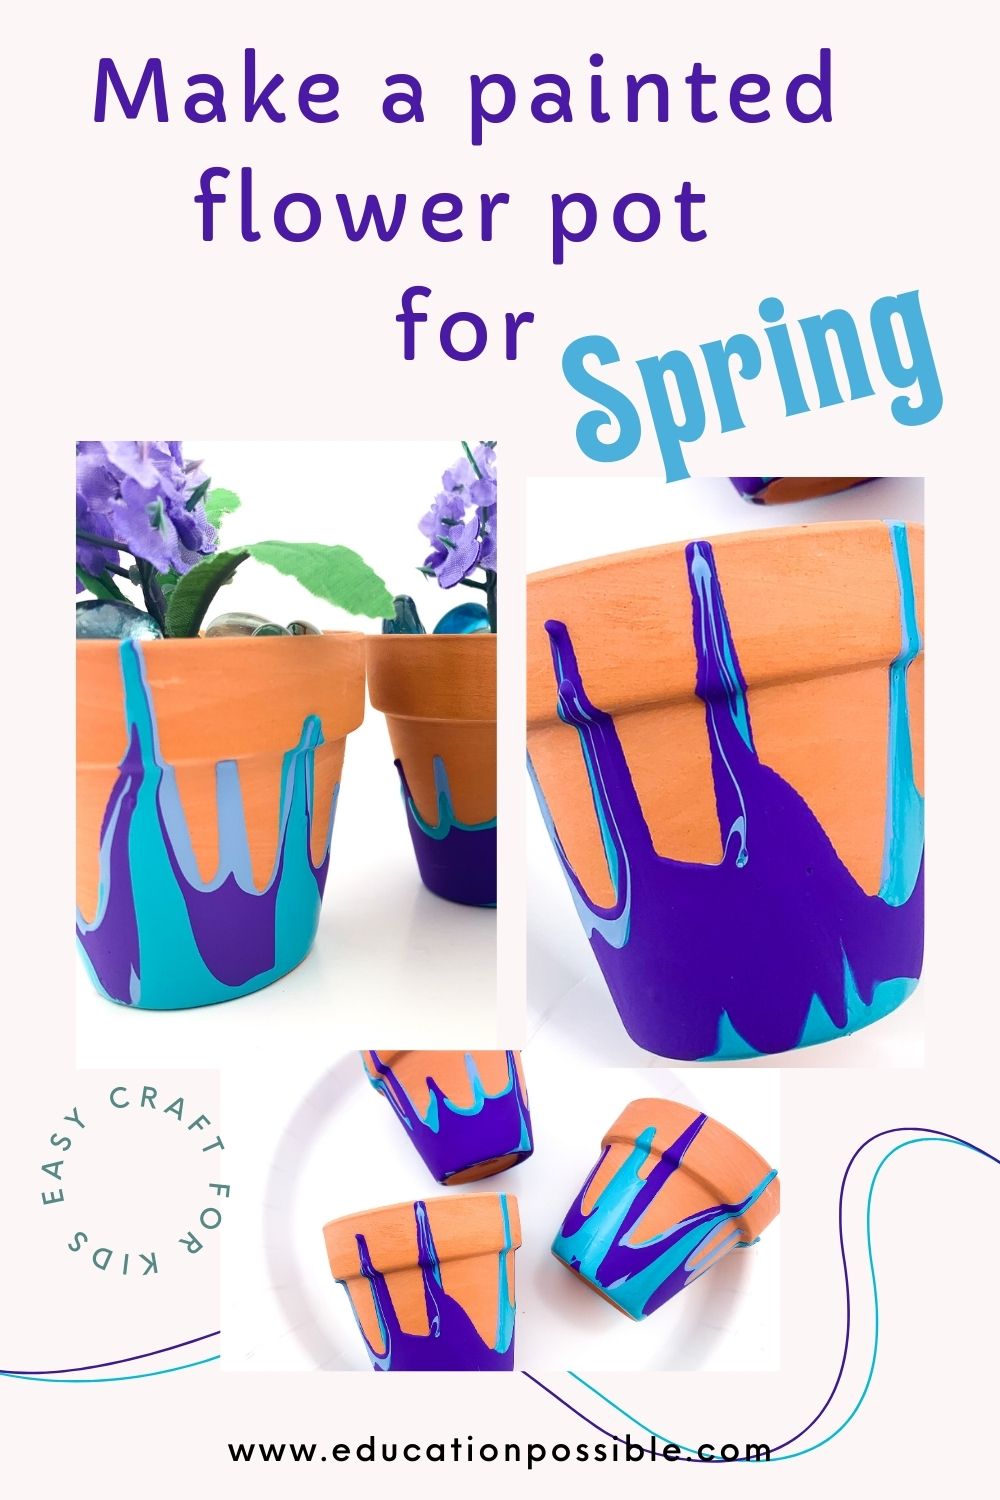 Collage of 3 images showing pour paint flower pots. Covered with purple and blue paint. DIY craft.